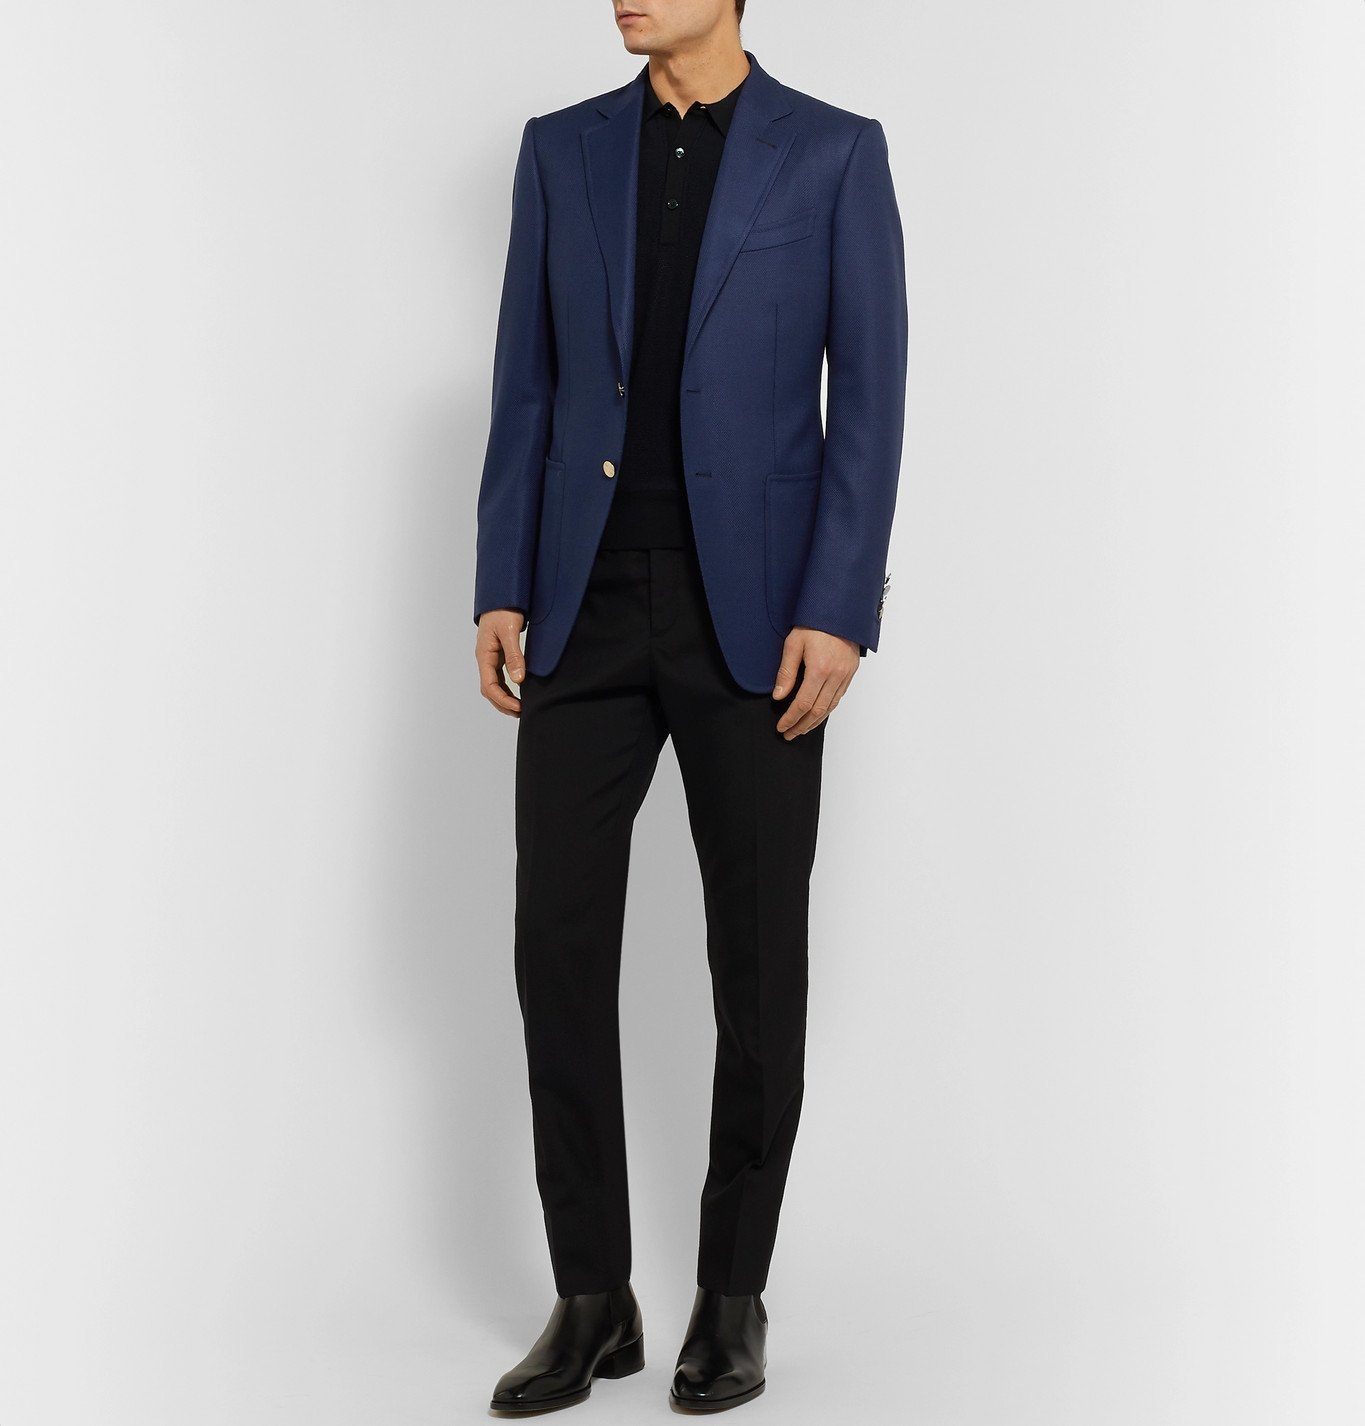 TOM FORD - O'Connor Slim-Fit Wool and Mohair-Blend Blazer - Blue TOM FORD